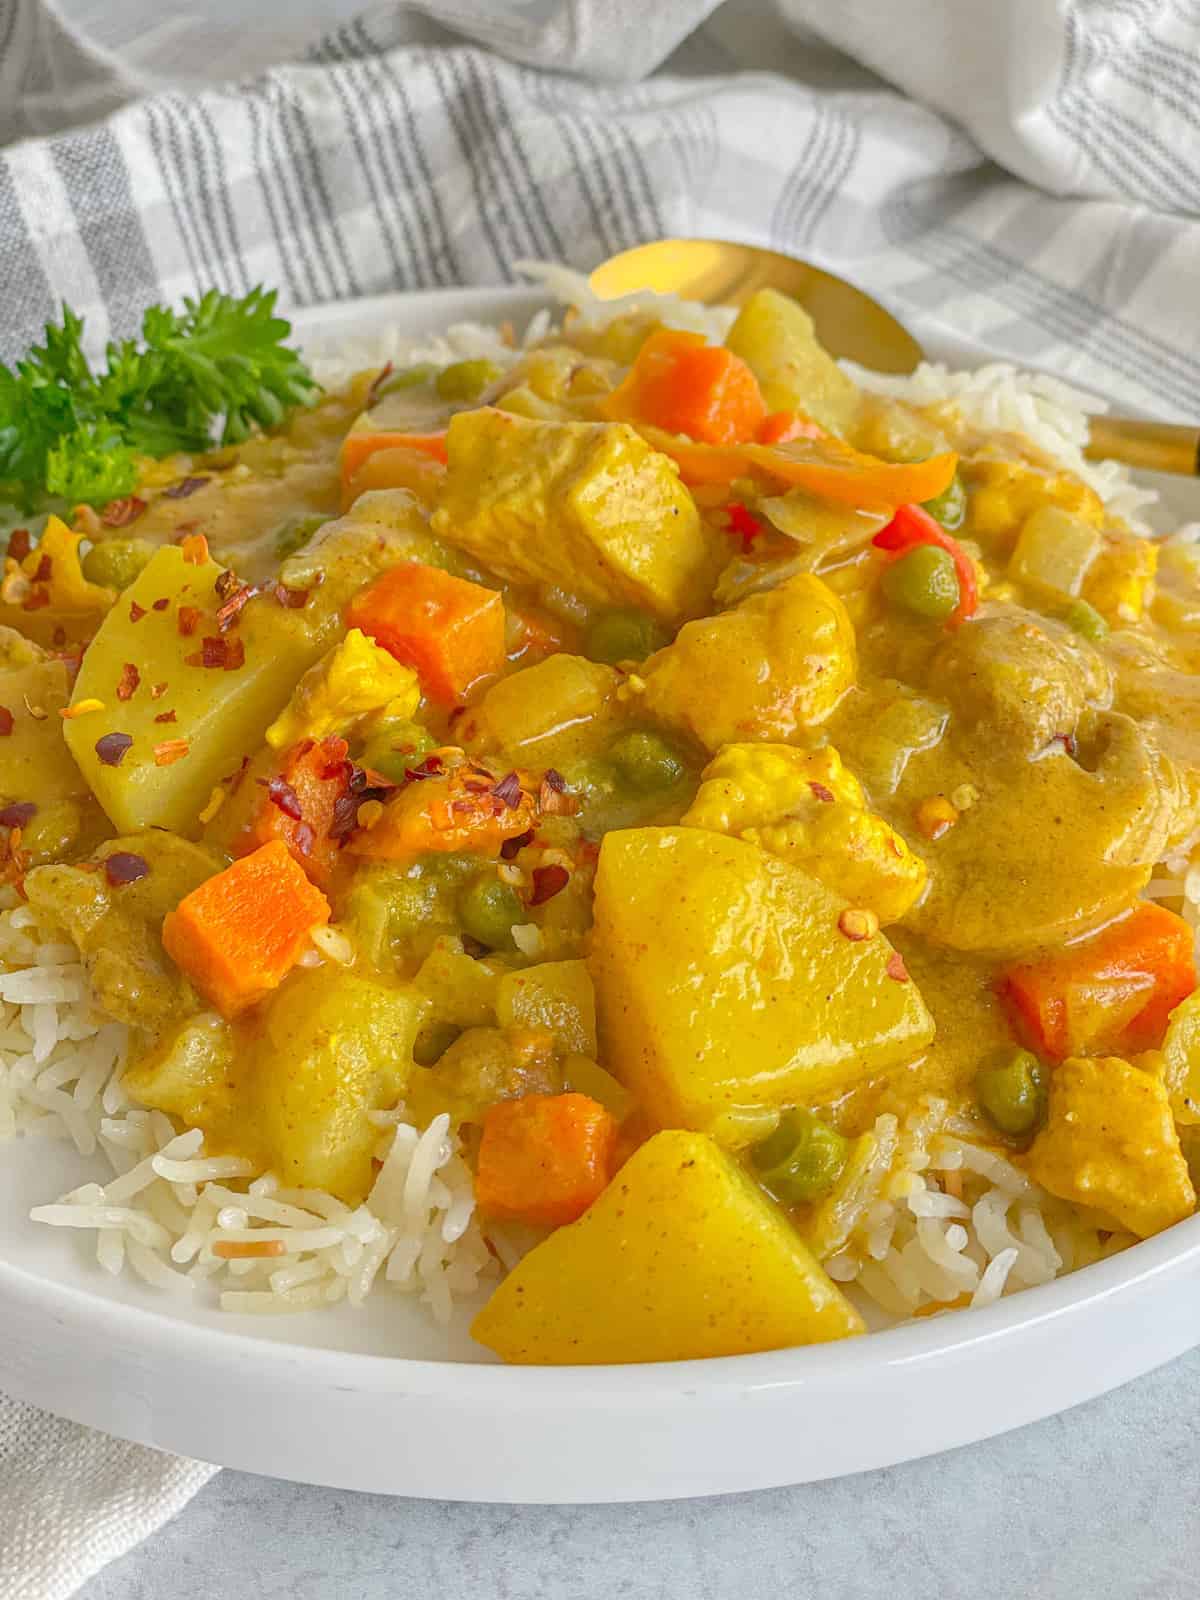 a close view of a dish of warm chicken curry with vegetables served on a bed of white rice